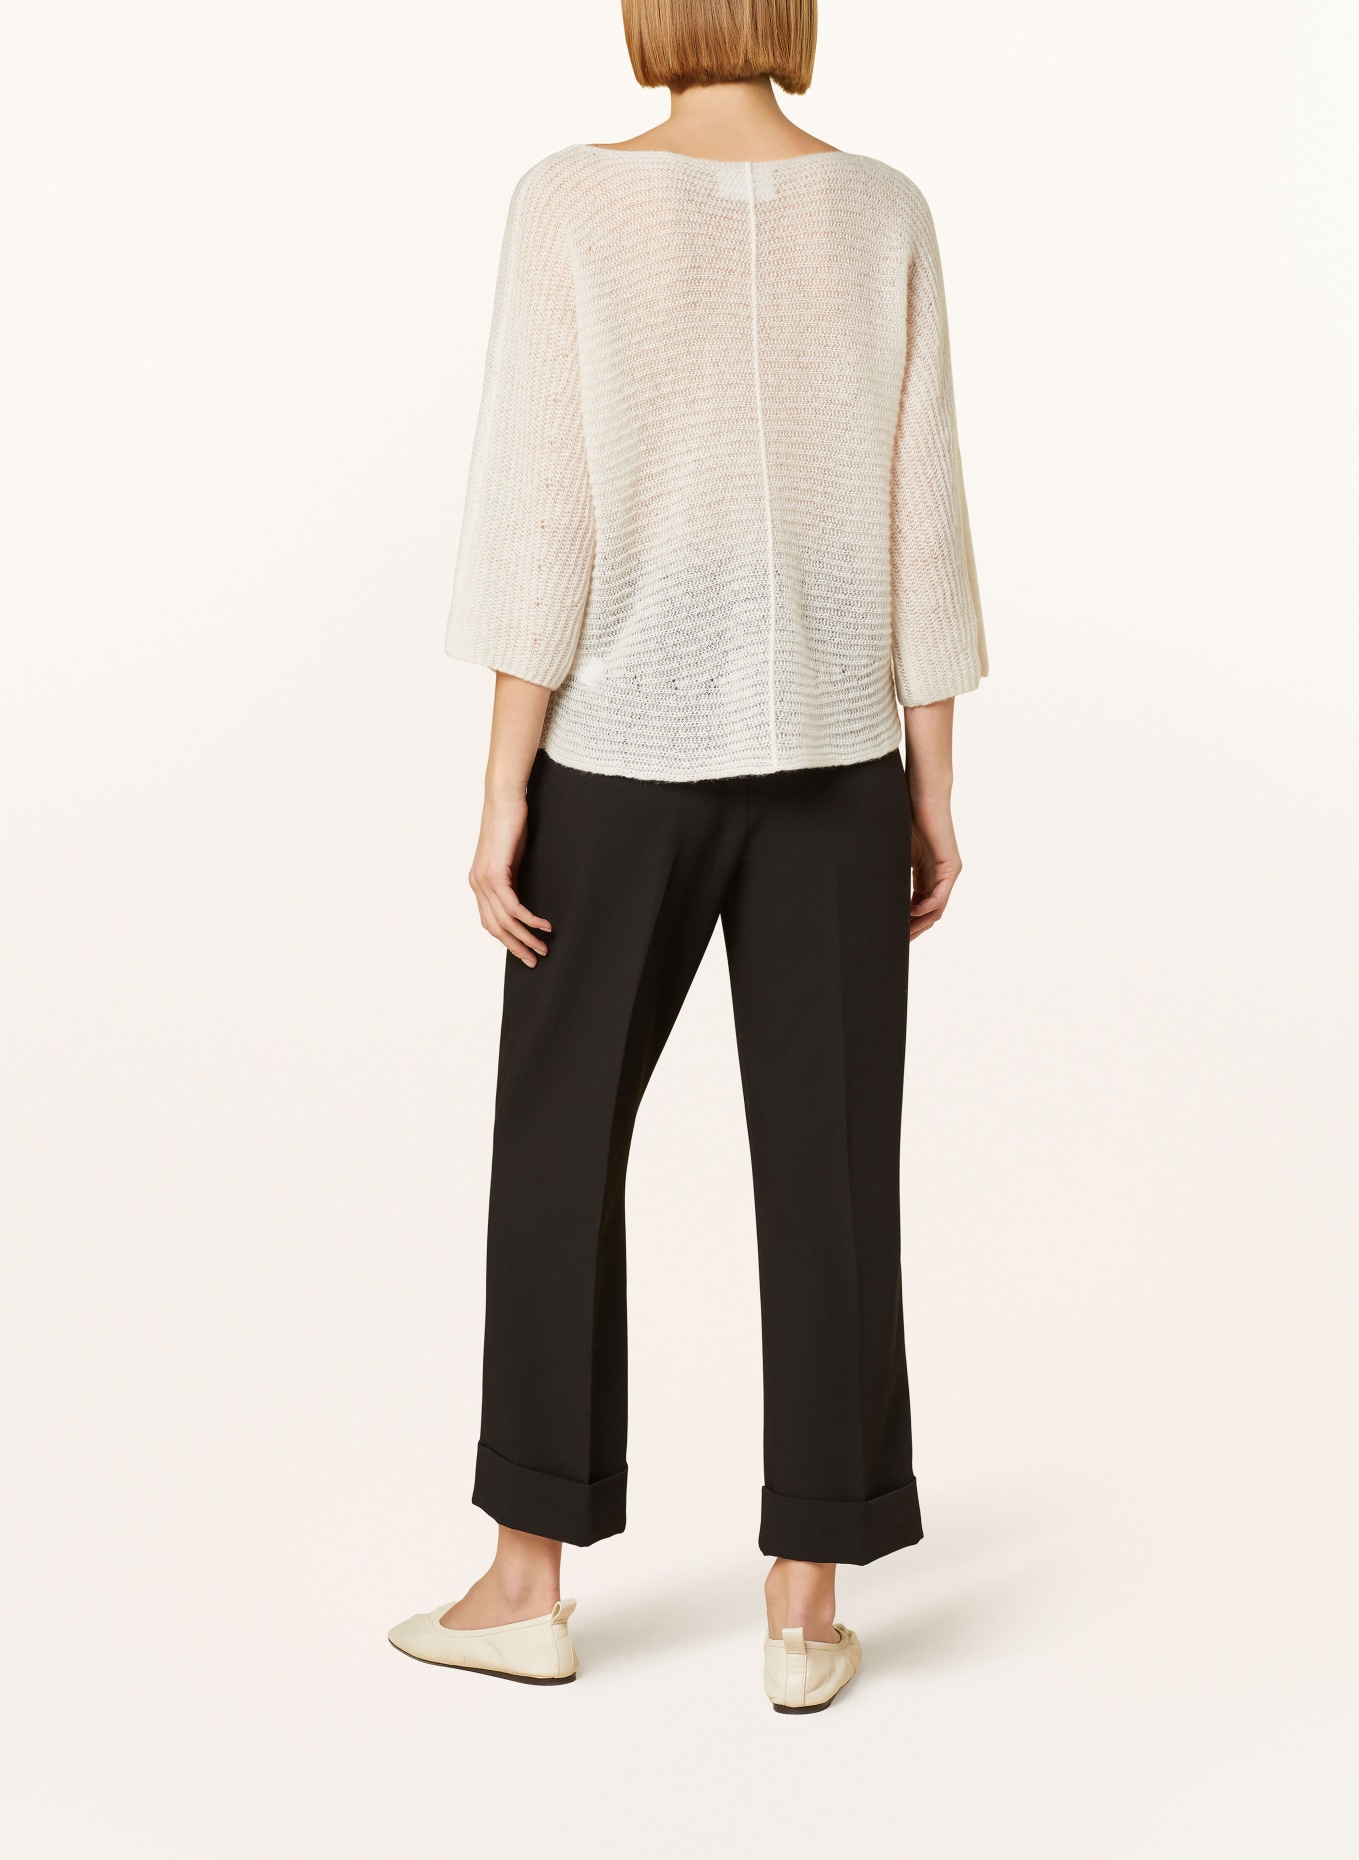 HEMISPHERE Cashmere sweater with 3/4 sleeves, Color: ECRU (Image 3)